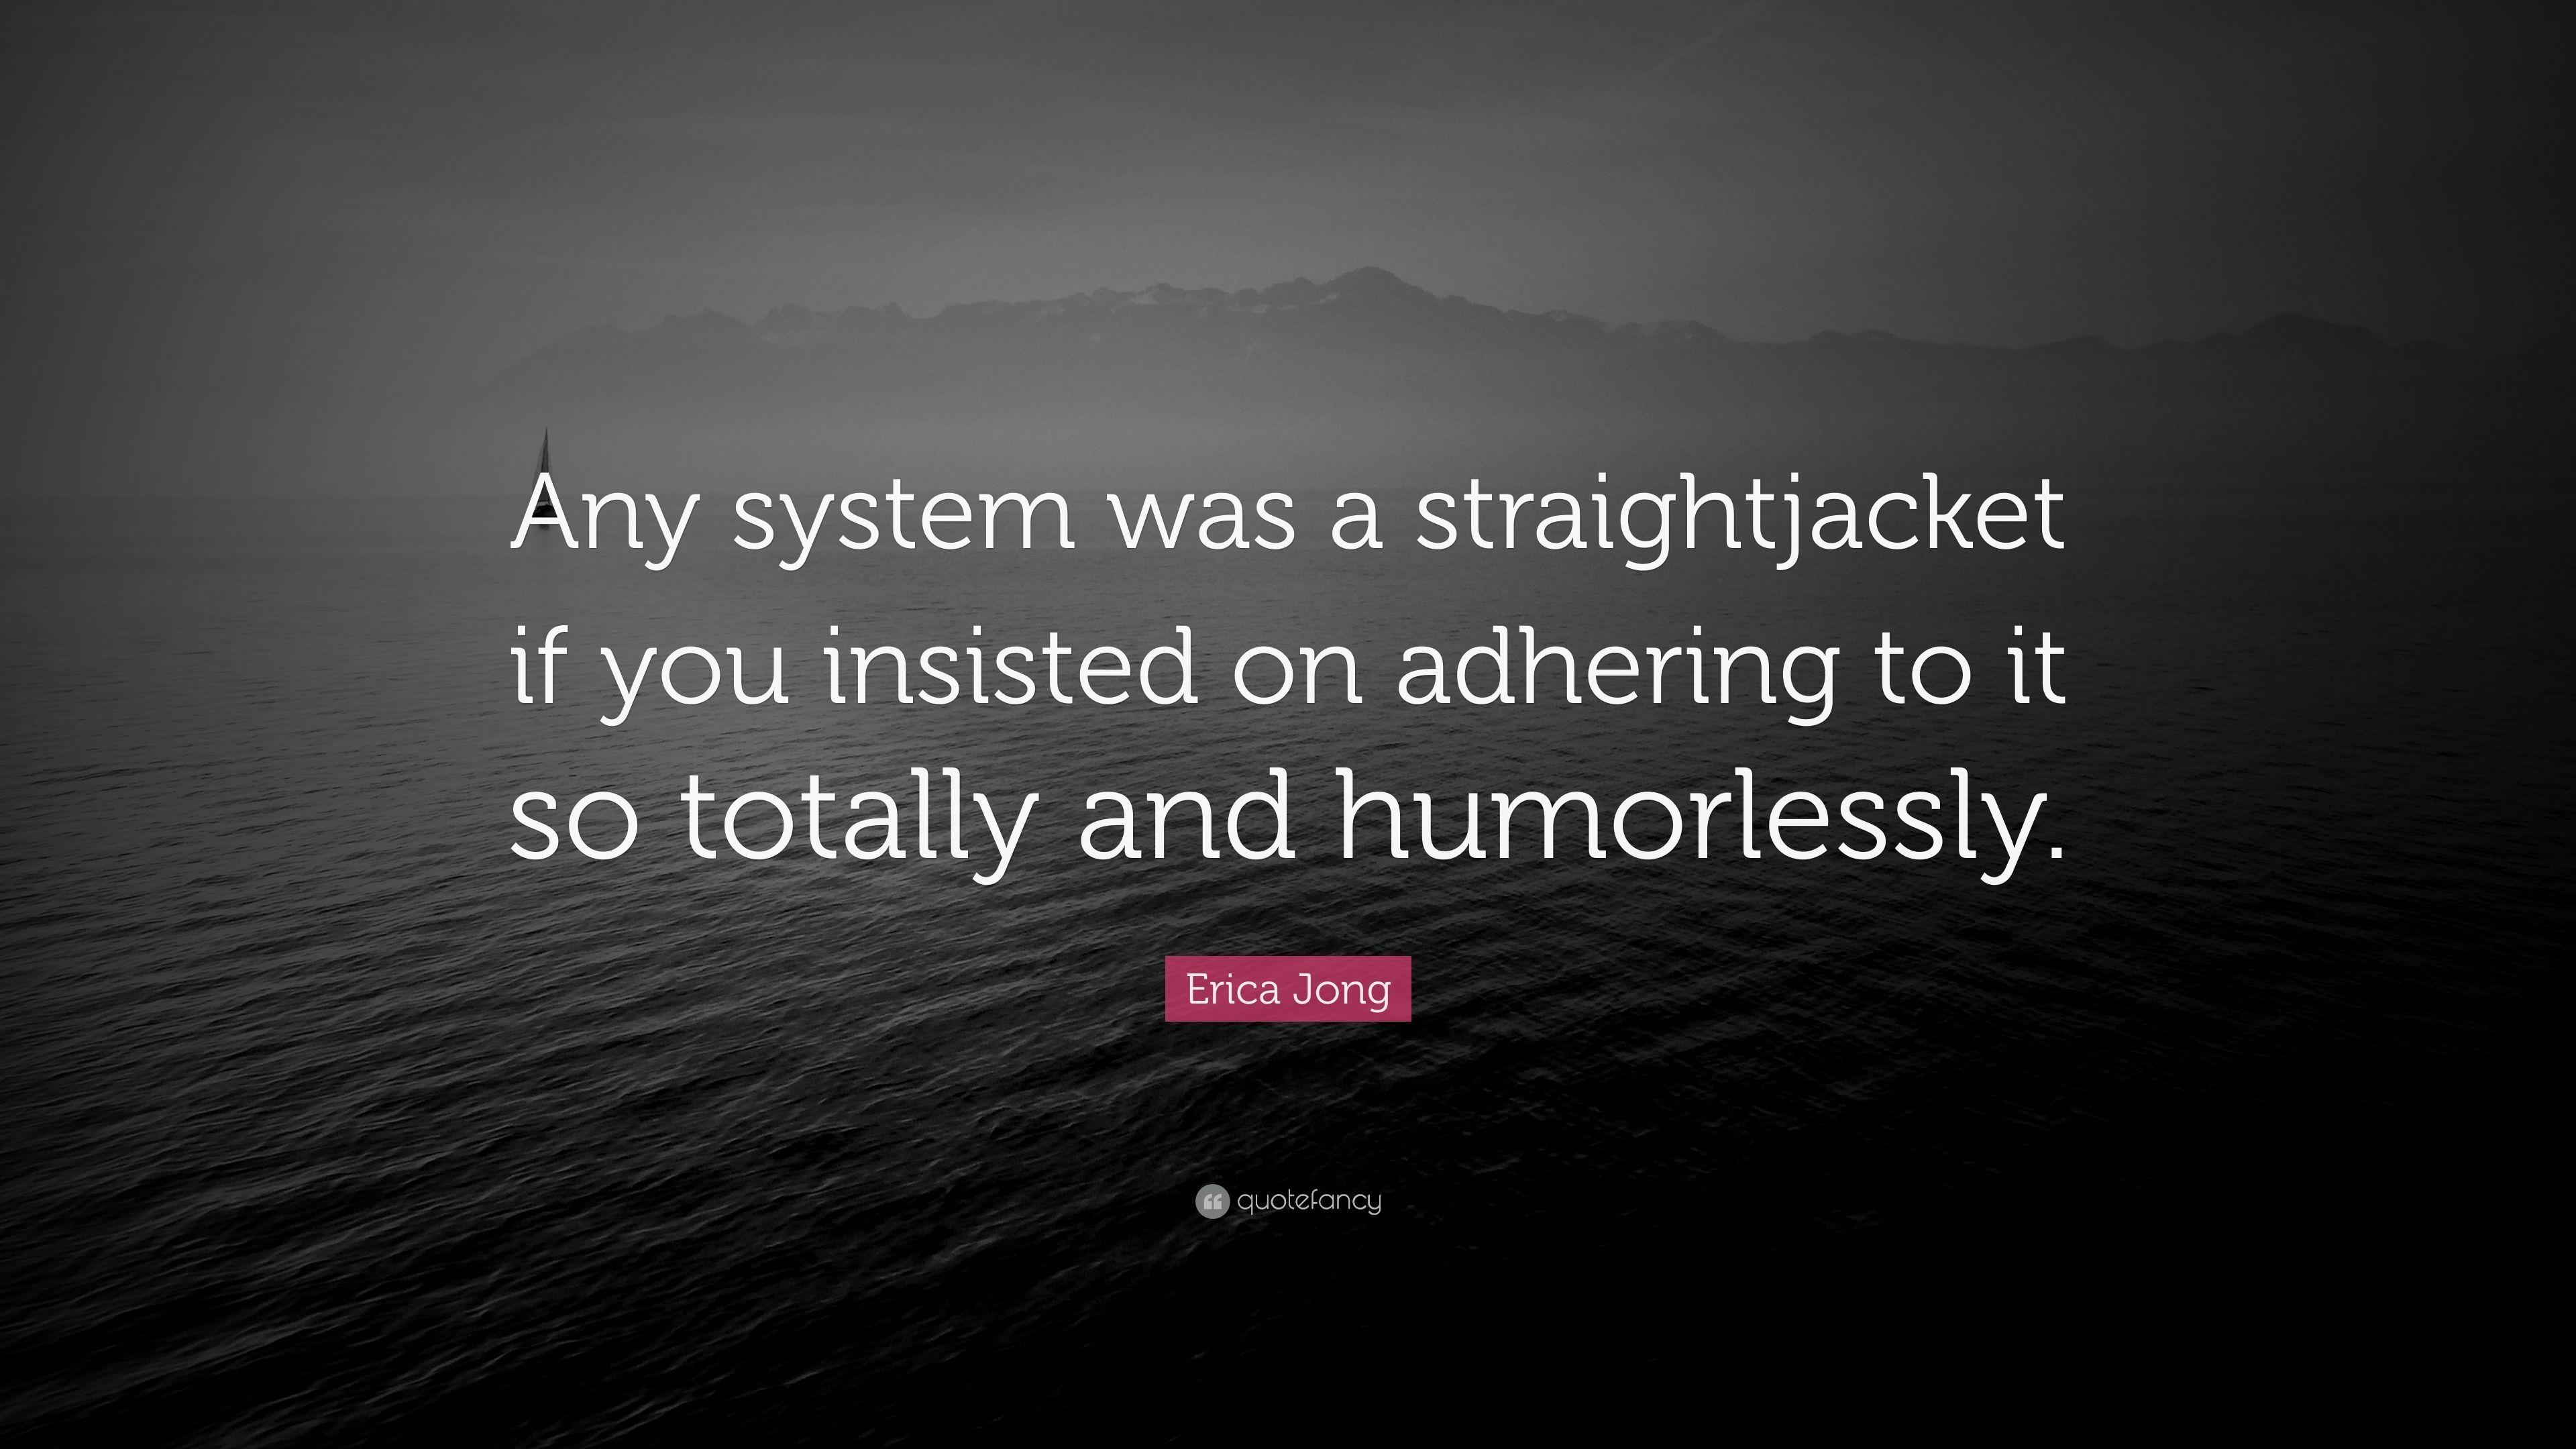 Erica Jong Quote: “Any system was a straightjacket if you insisted